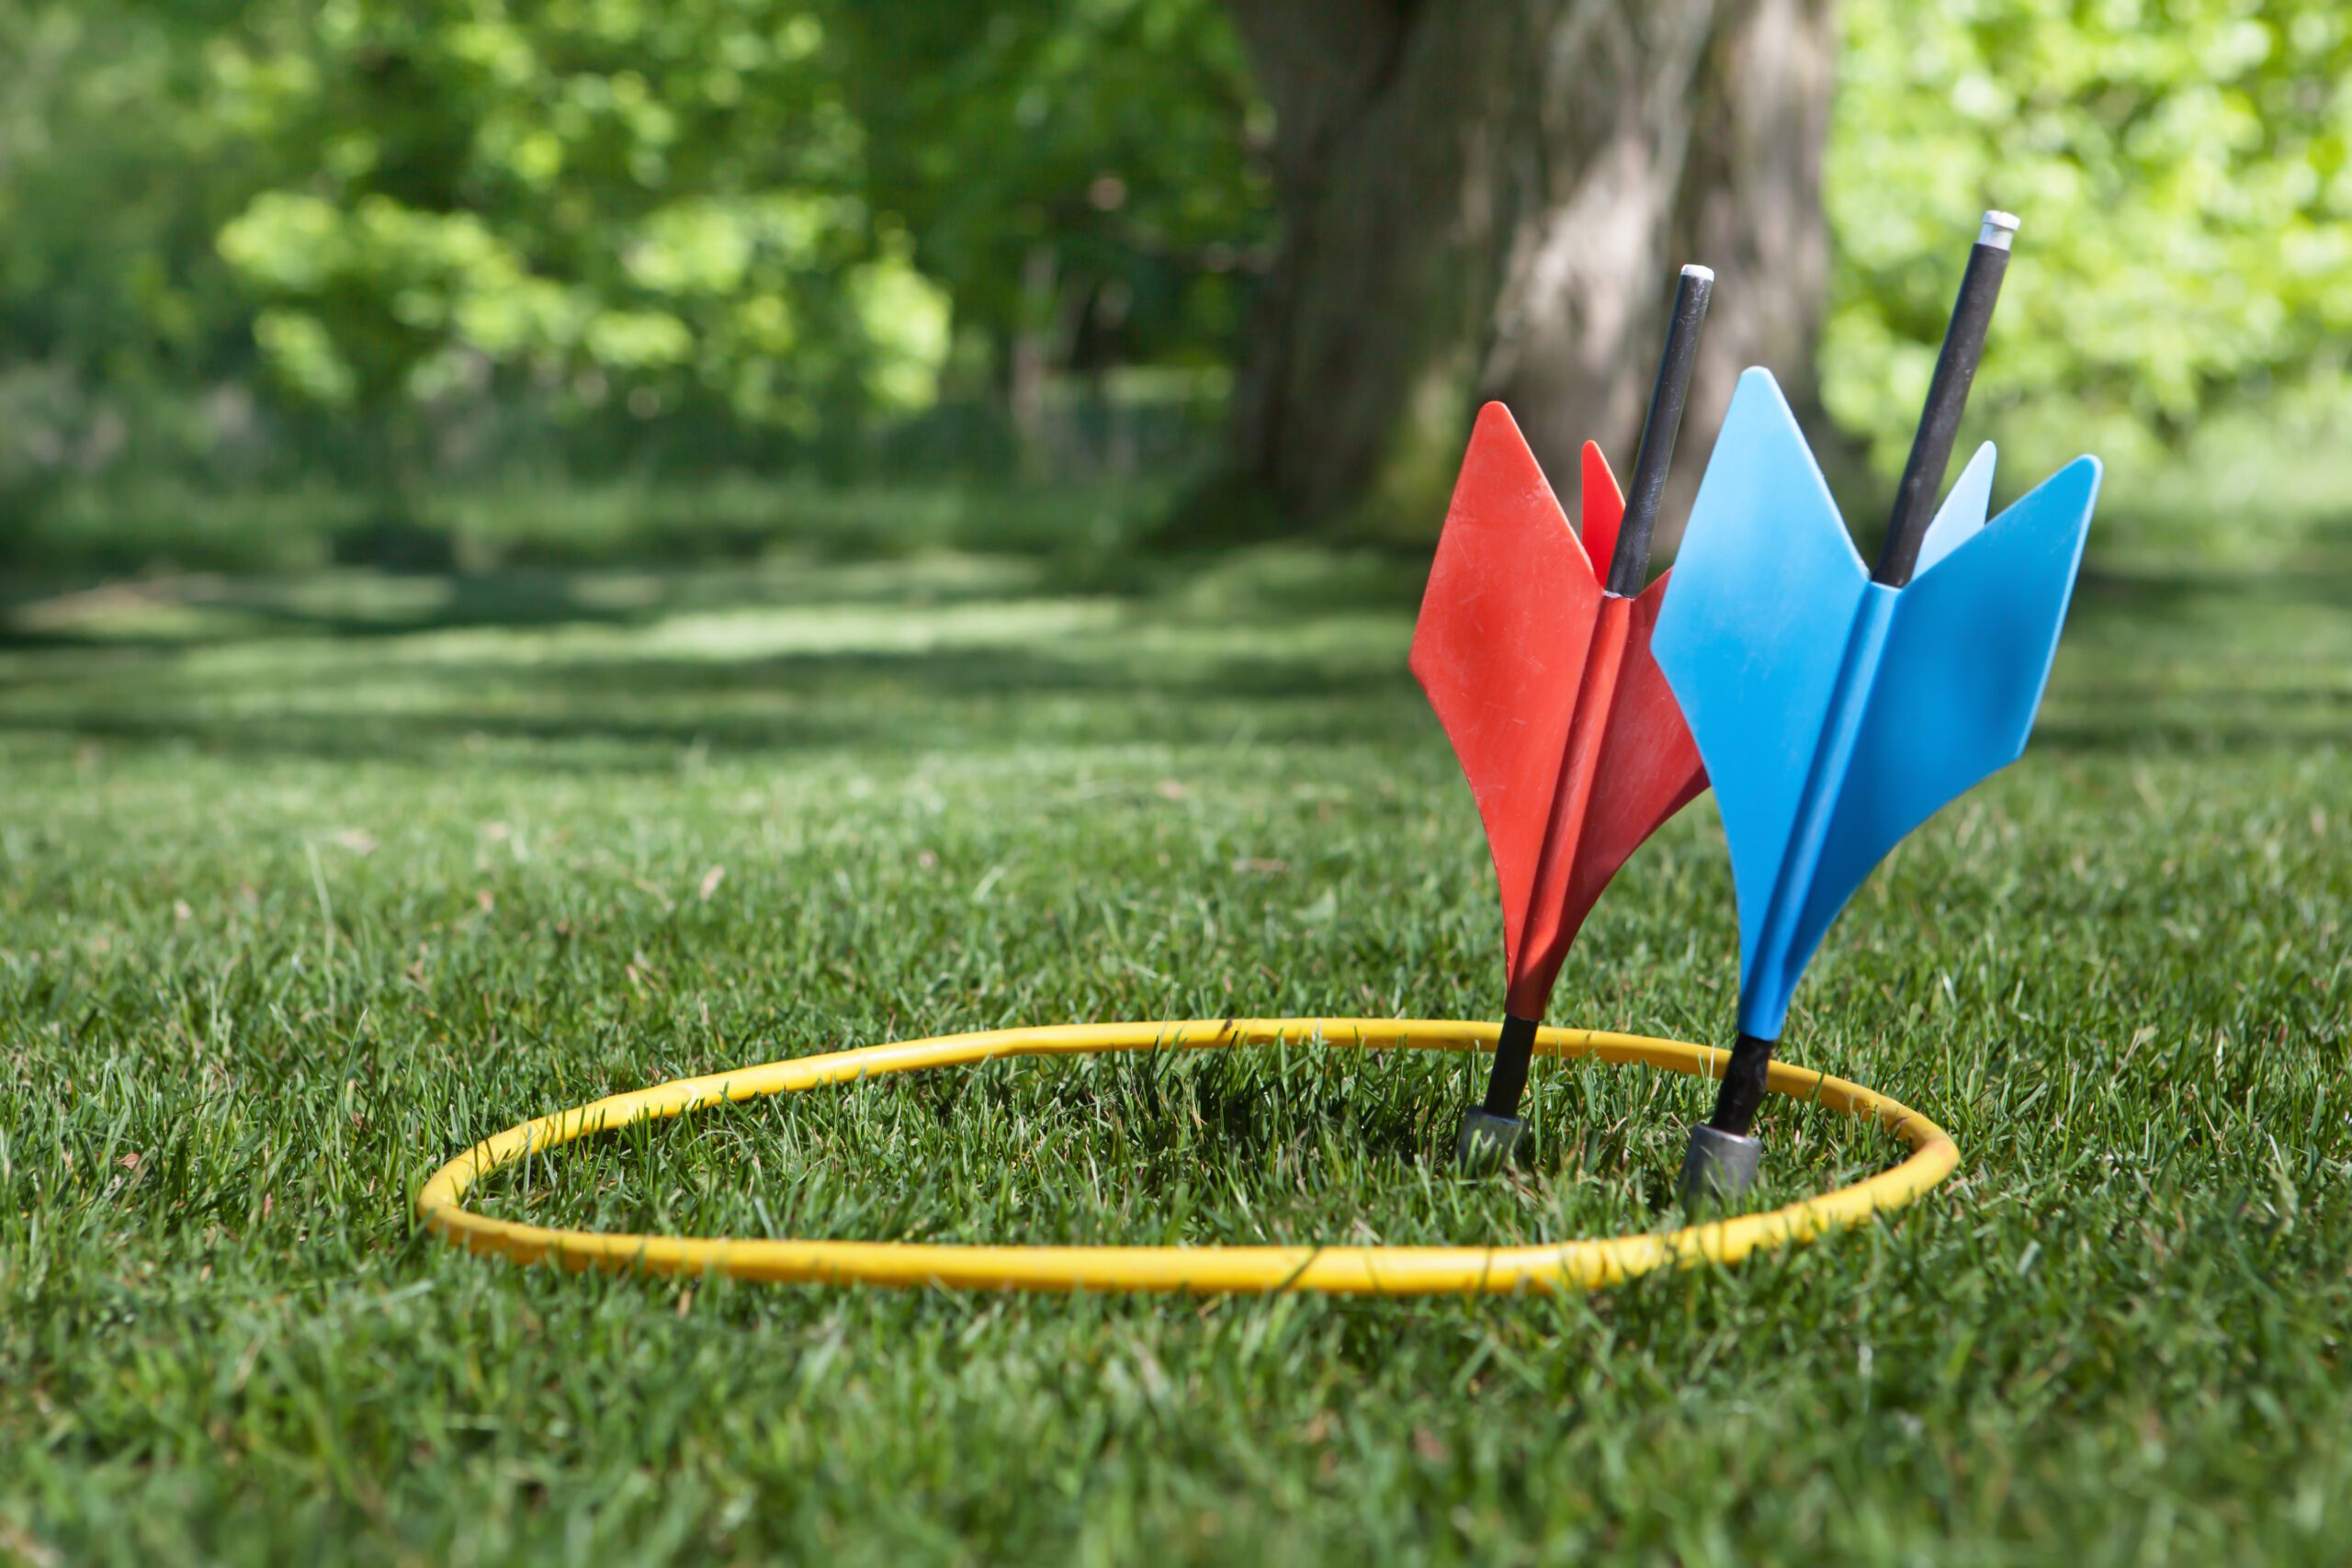 a shot of some vintage lawn darts sometimes called JARTS. One of each color inside the yellow ring in a back yard setting.